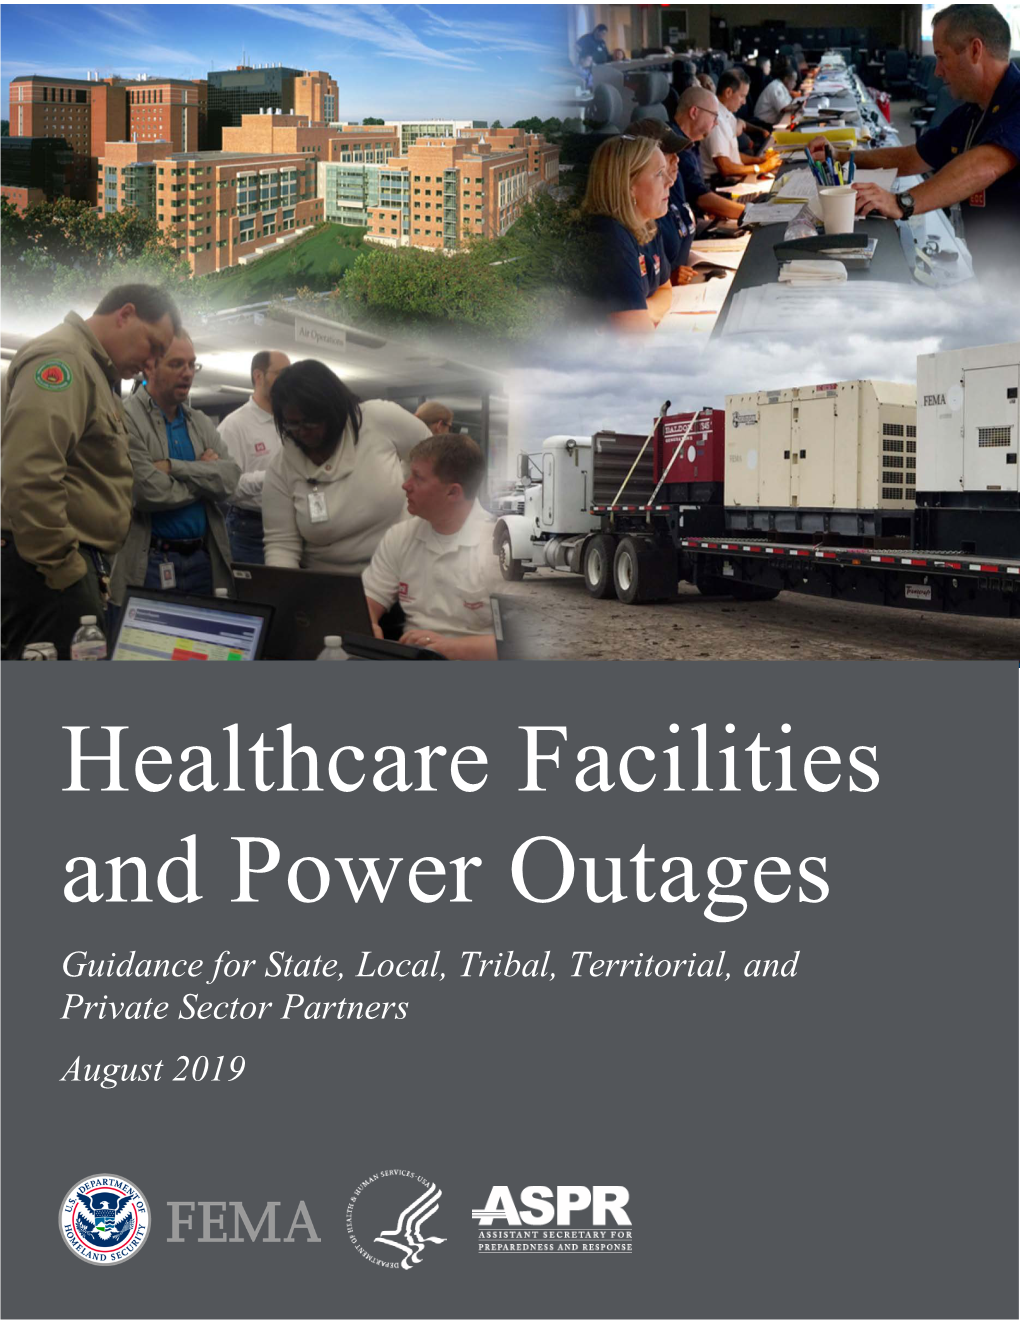 Healthcare Facilities and Power Outages Guidance for State, Local, Tribal, Territorial, And